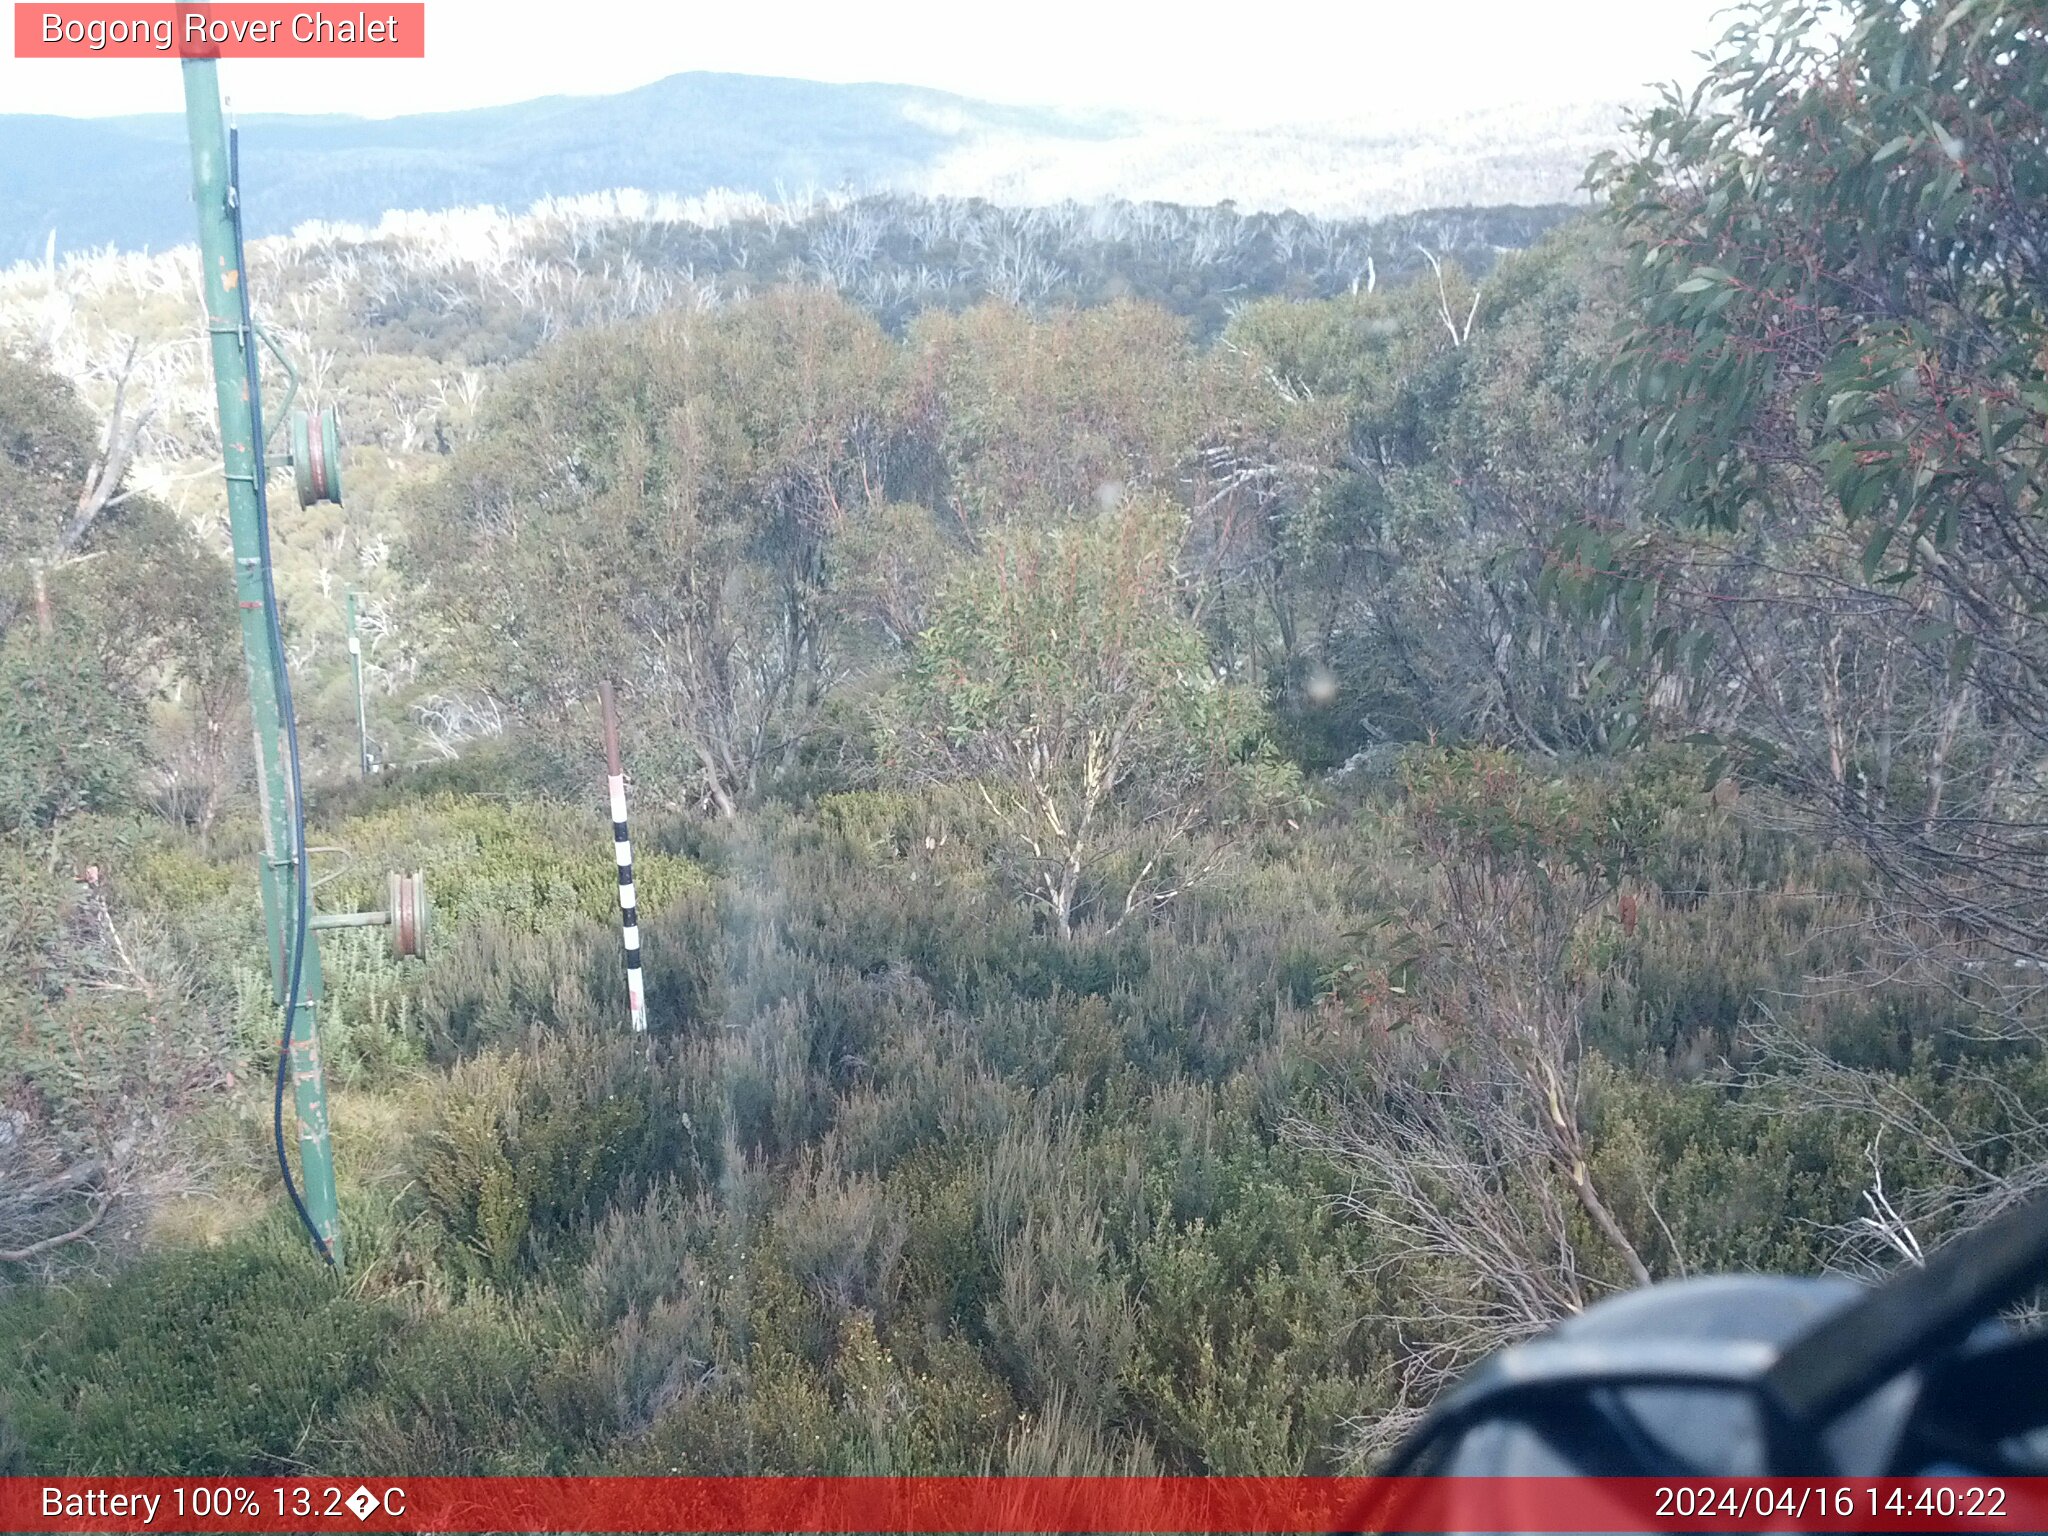 Bogong Web Cam 2:40pm Tuesday 16th of April 2024